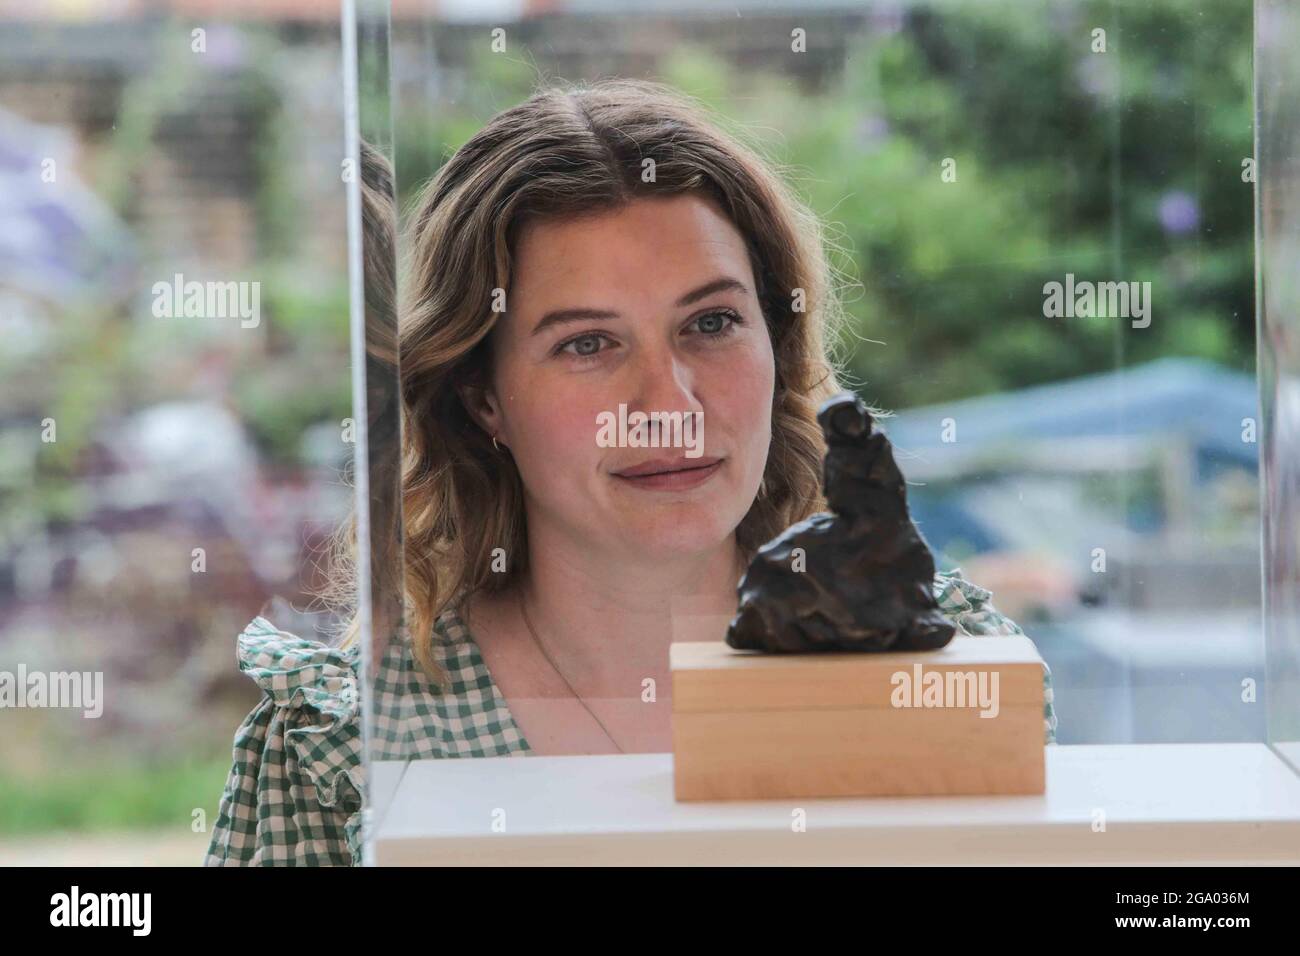 London UK 28 July 2021 Tracey Emin The Wedding £6,500 2019 Bronze sculpture Edition of 50 5cm x 10cm x 12cmTracy Emin  Turner Prize-nominated unmade bed might have won her fame and notoriety as part of the YBA movement, but her poignant, autobiographical paintings, sculptures, photographs and installations have enduring appeal, winning her places in collections including the Tate Gallery in London and New Yorkʼs MoMA. Inspired by Edvard Munch and Egon Schiele, Emin studied at the Royal Academy of Arts and has maintained a continuity in themes throughout her career, exploring gender and relatio Stock Photo